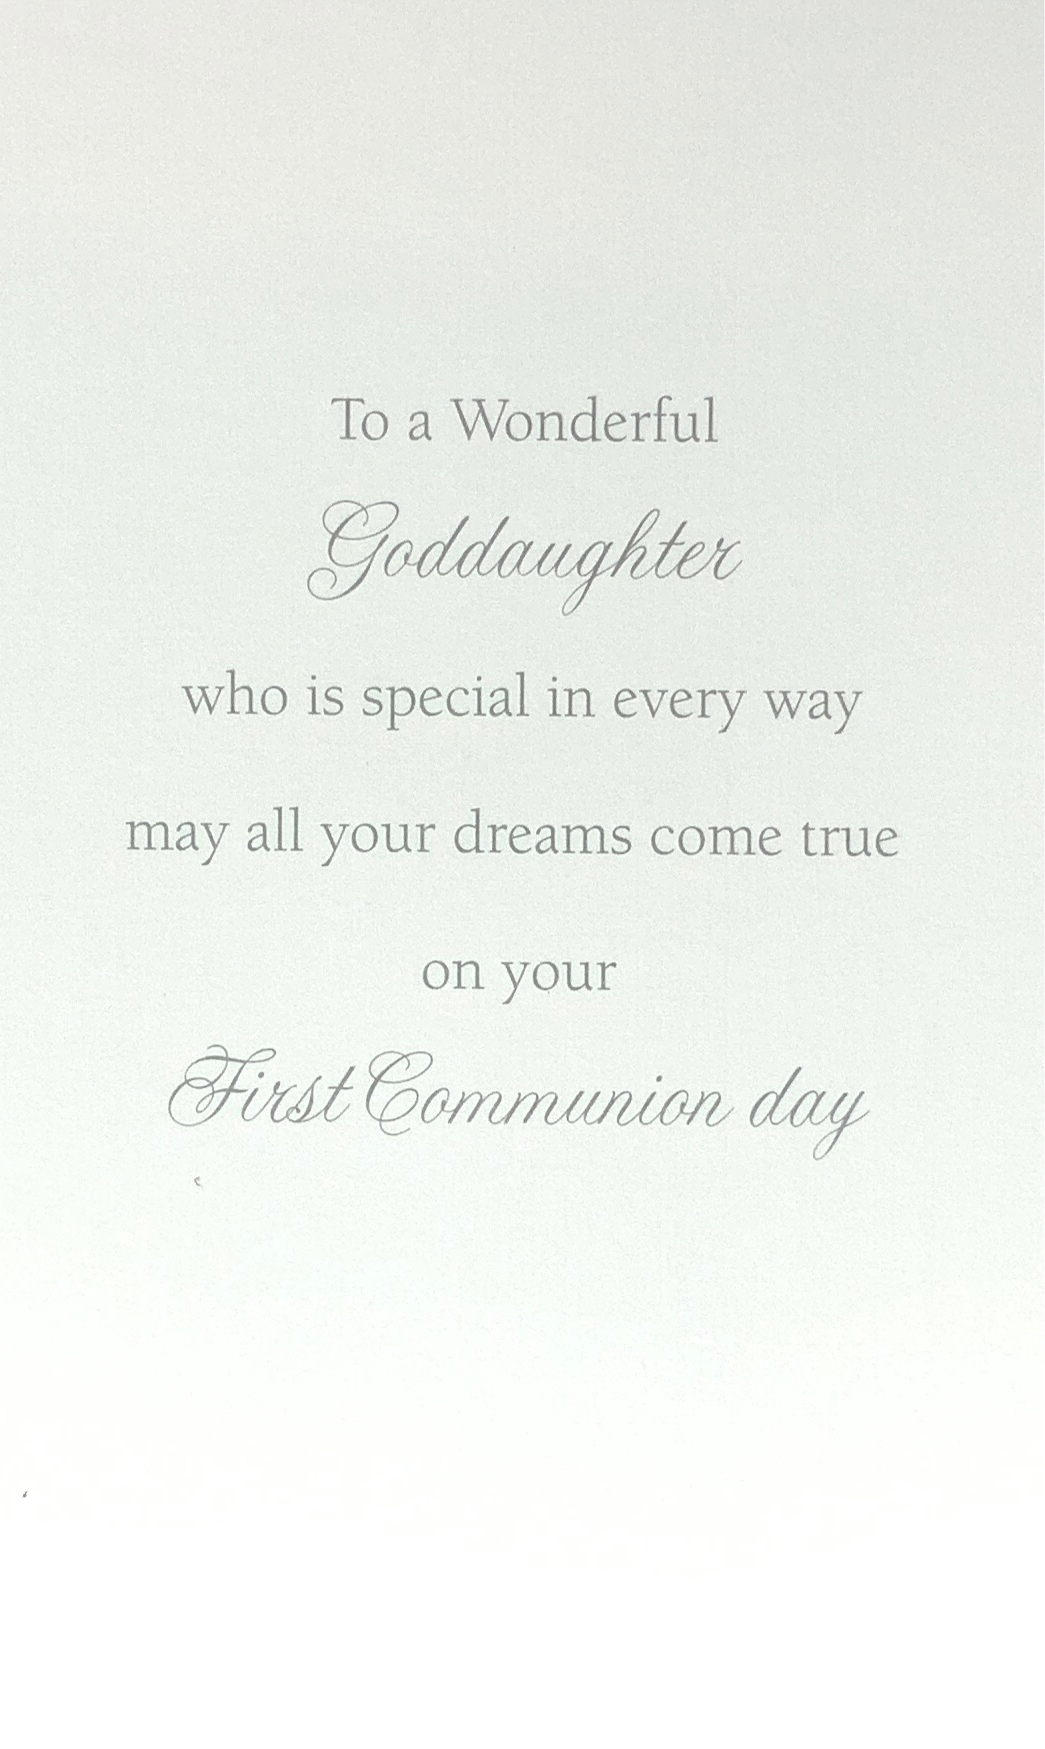 Communion Card - To A Wonderful Goddaughter